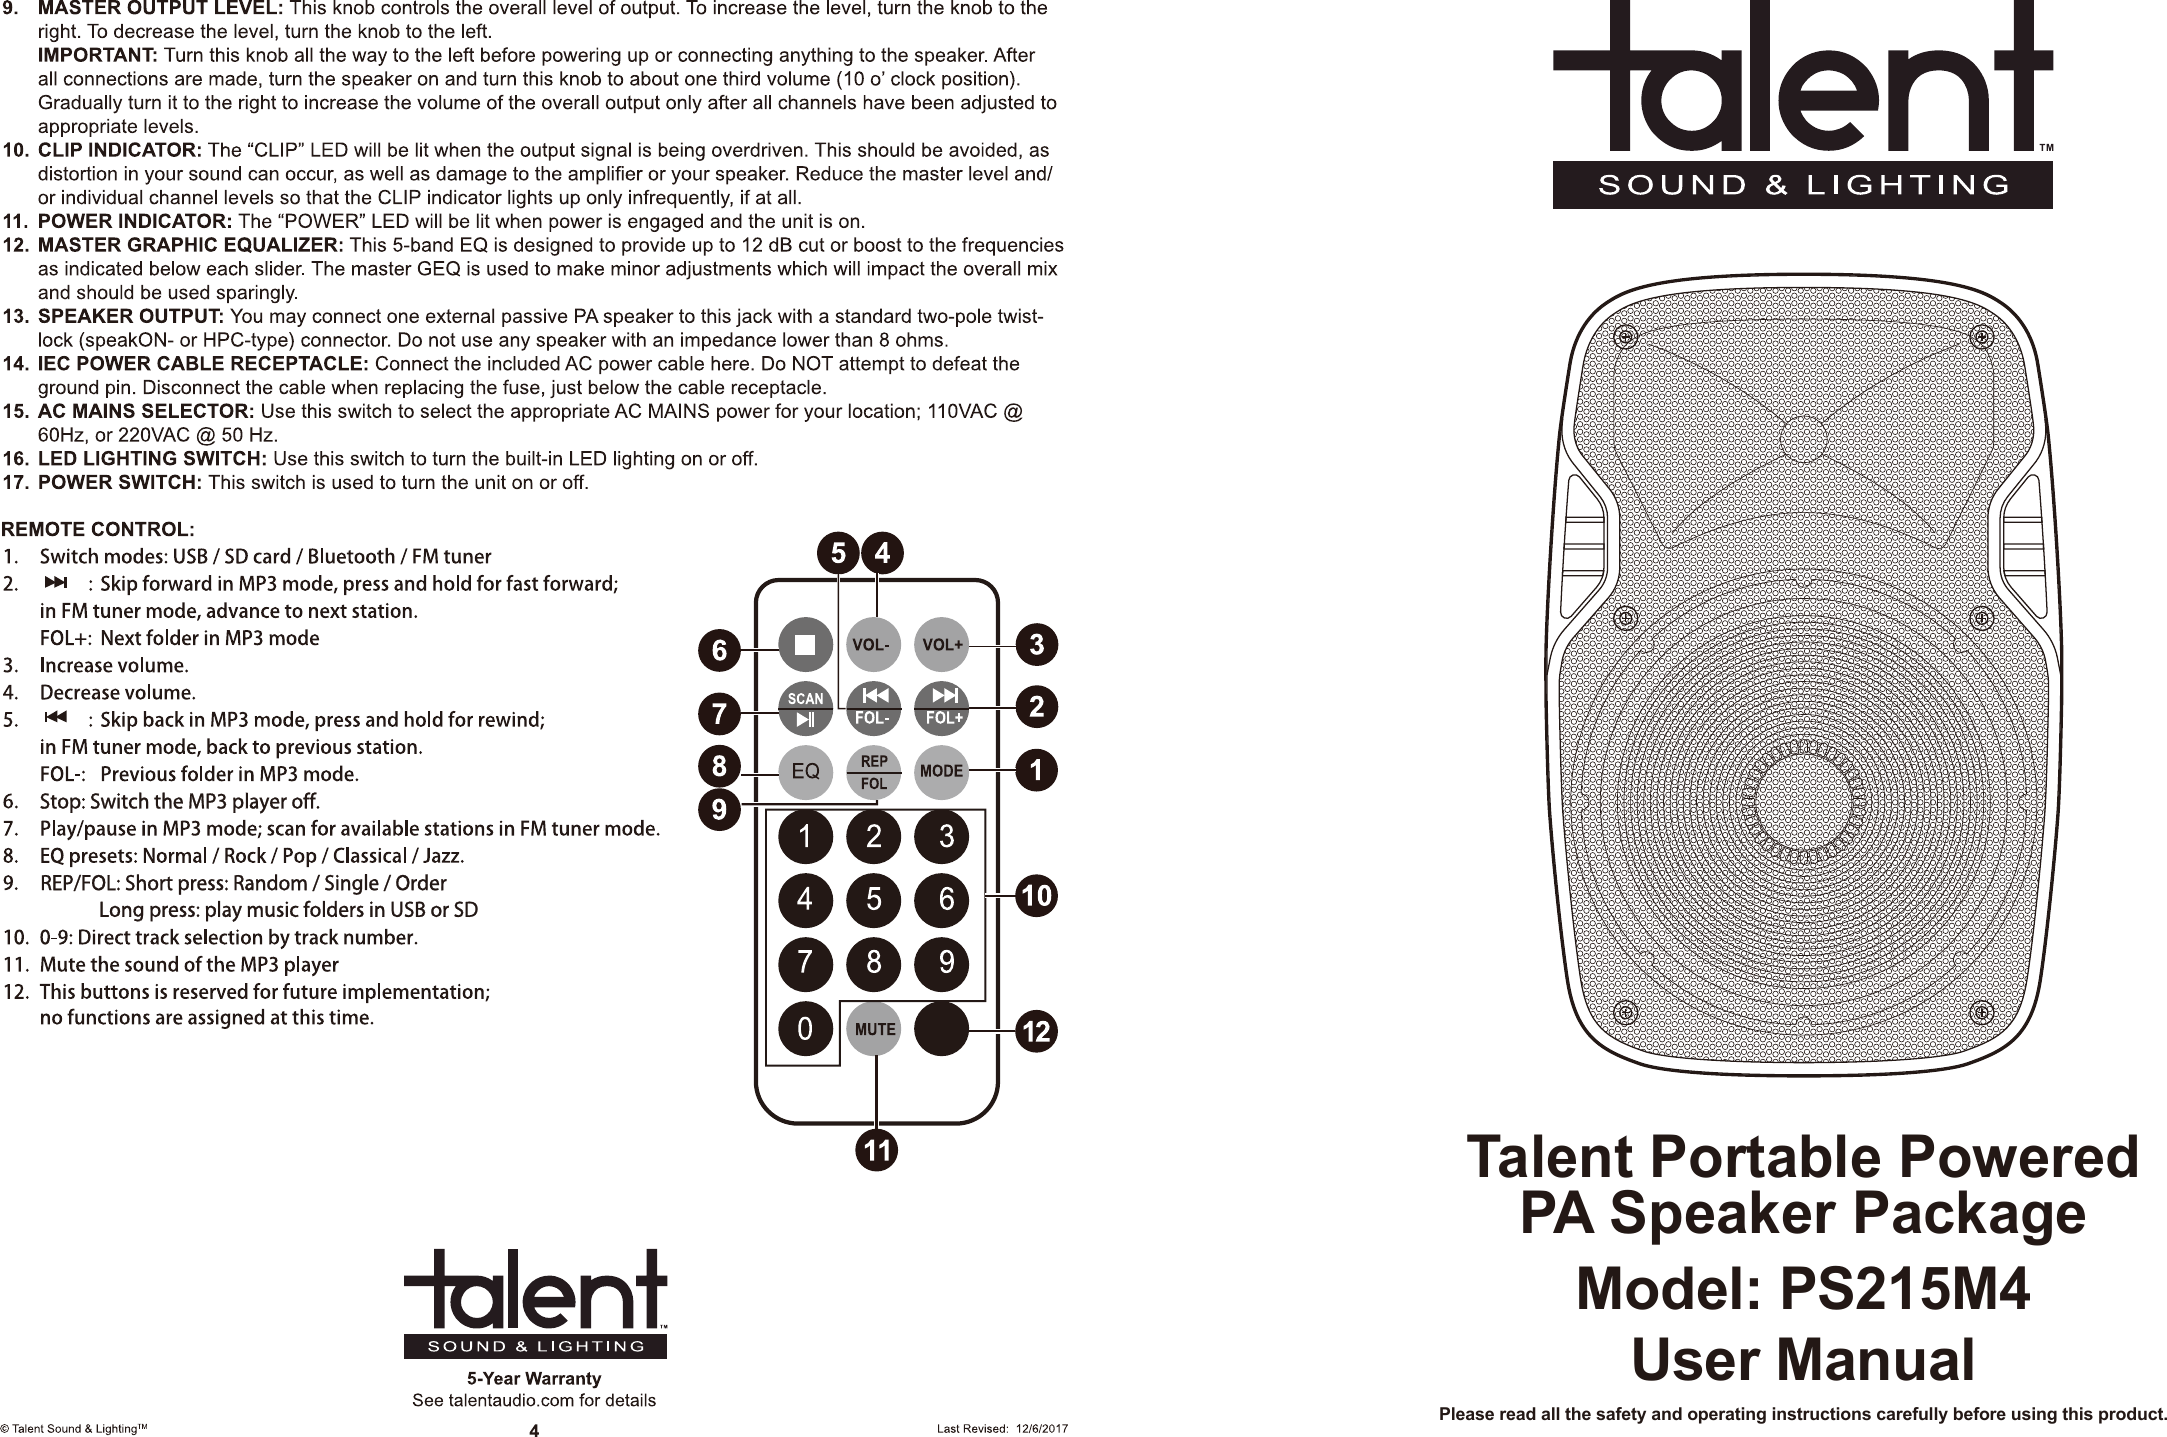 Please read all the safety and operating instructions carefully before using this product.User ManualModel: PS215M4Talent Portable PoweredPA Speaker Package